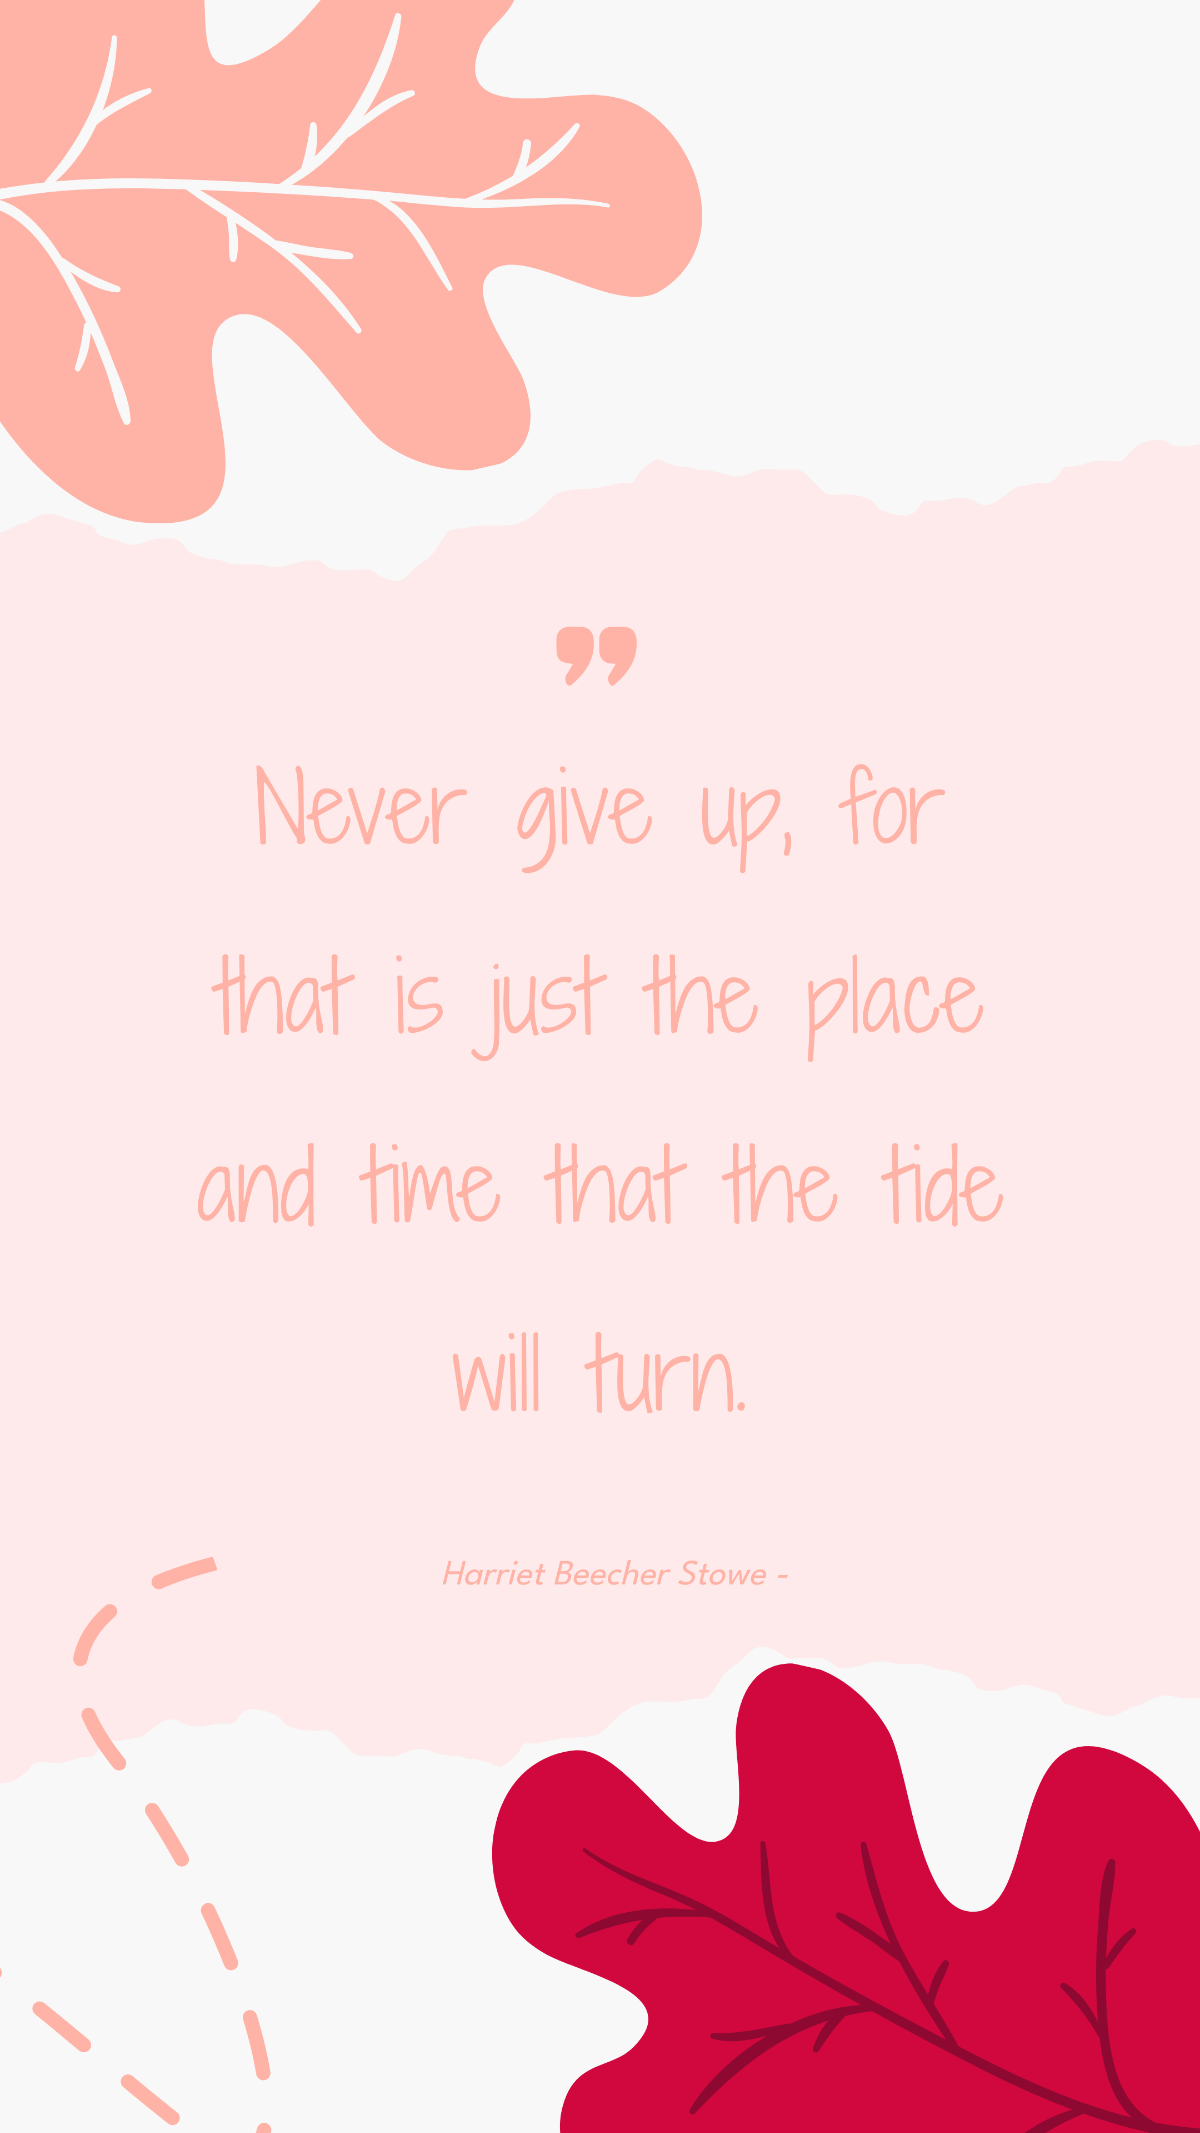 Harriet Beecher Stowe - Never give up, for that is just the place and time that the tide will turn. Template